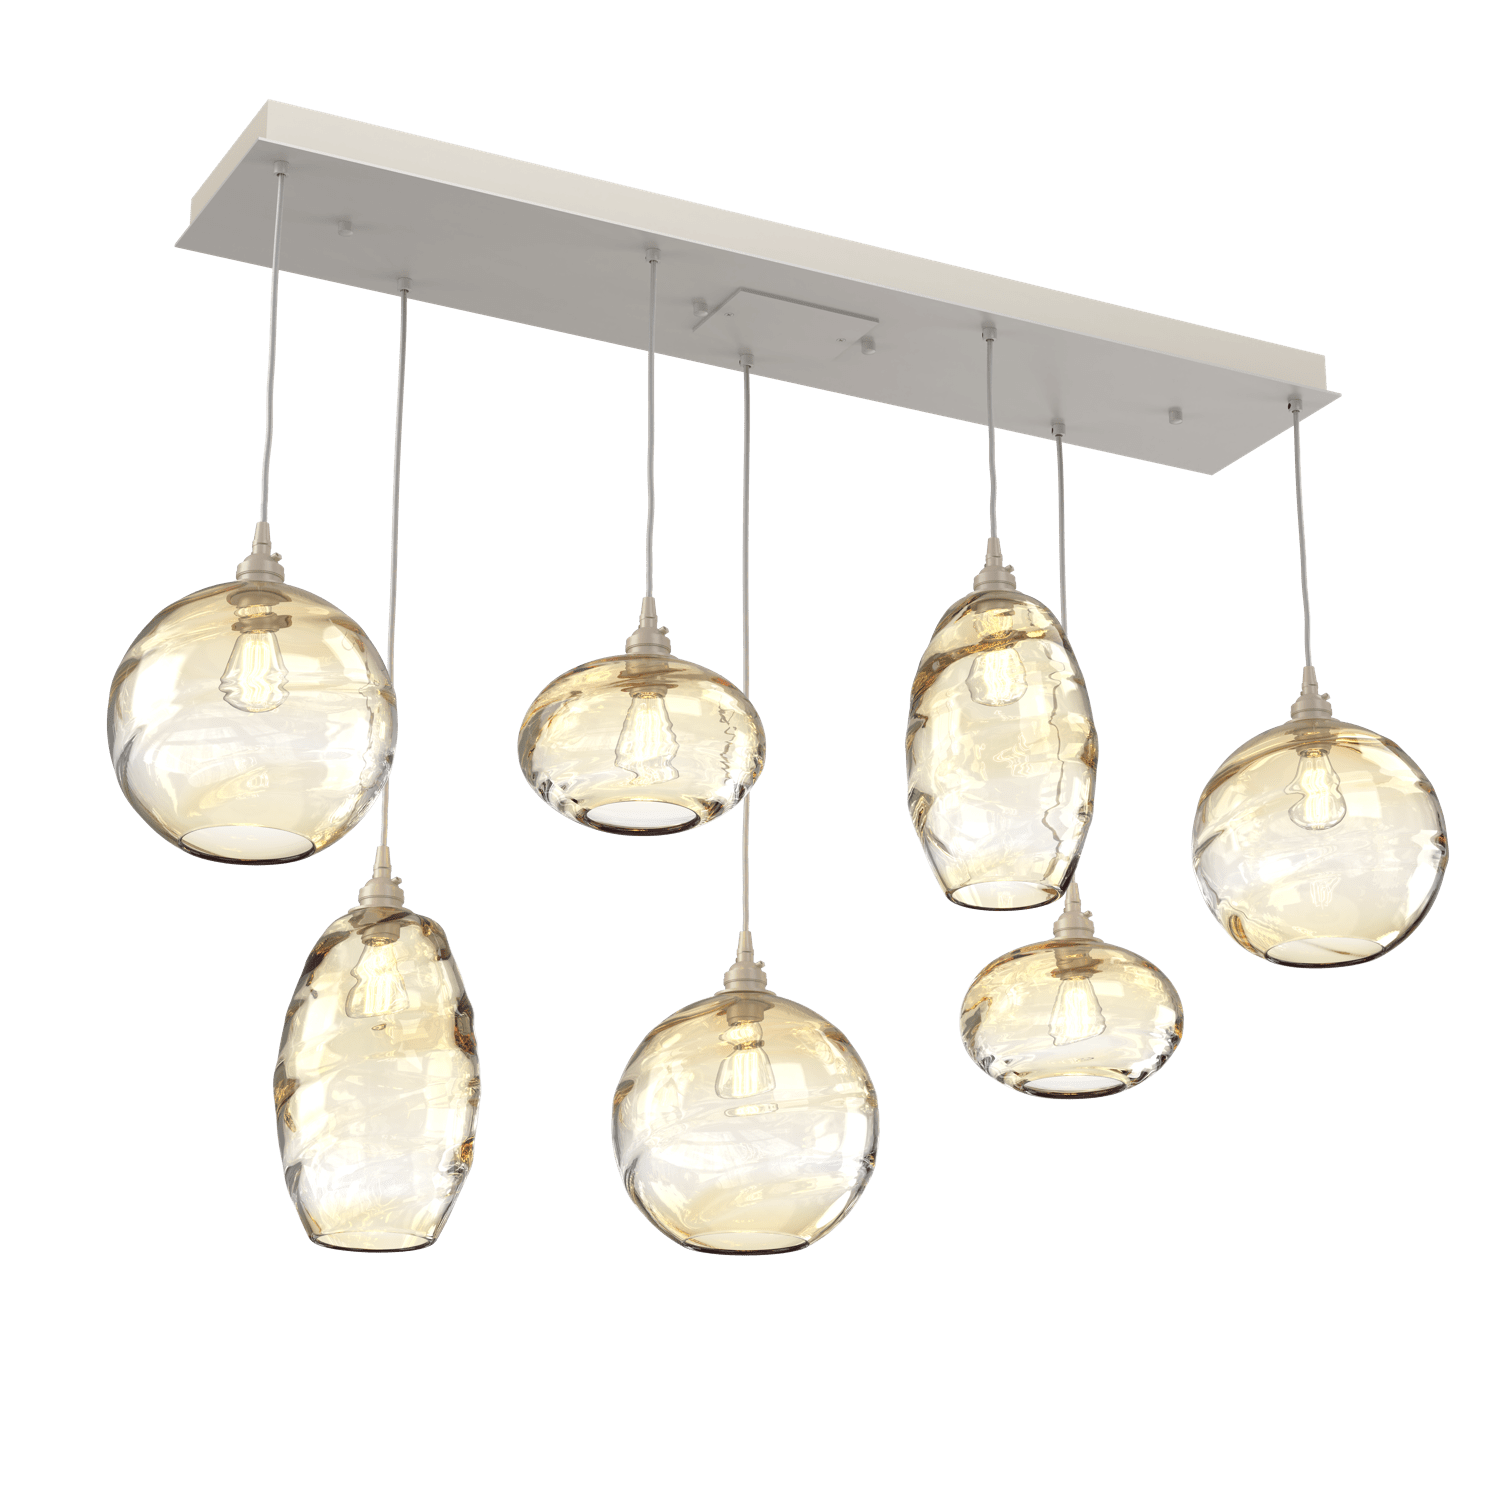 PLB0048-07-BS-OA-Hammerton-Studio-Optic-Blown-Glass-Misto-7-light-linear-pendant-chandelier-with-metallic-beige-silver-finish-and-optic-amber-blown-glass-shades-and-incandescent-lamping